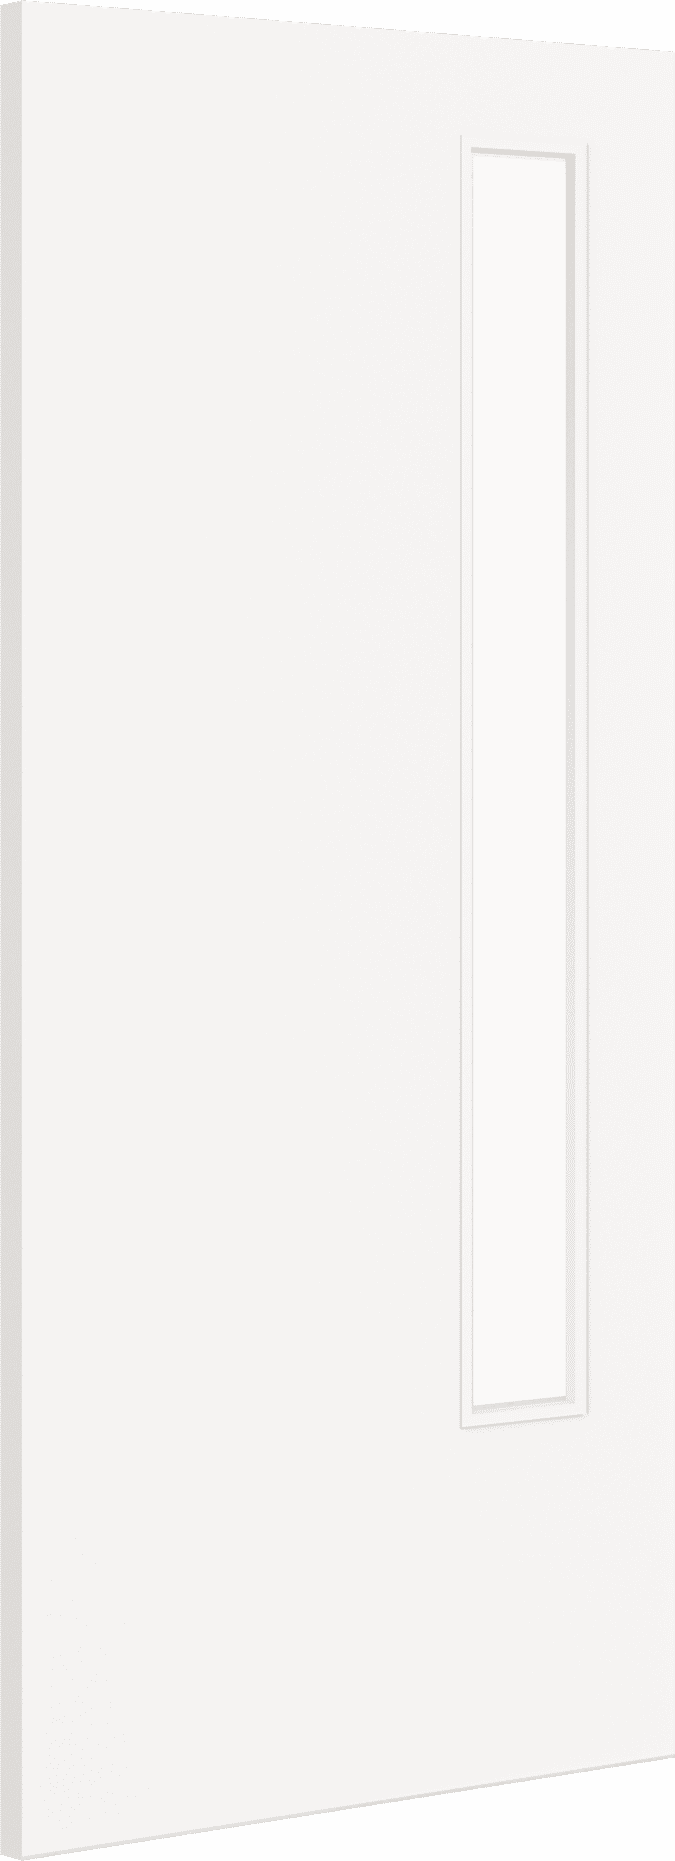 1981mm x 686mm x 44mm (27") Architectural Paint Grade White 13 Frosted Glazed Fire Door Blank